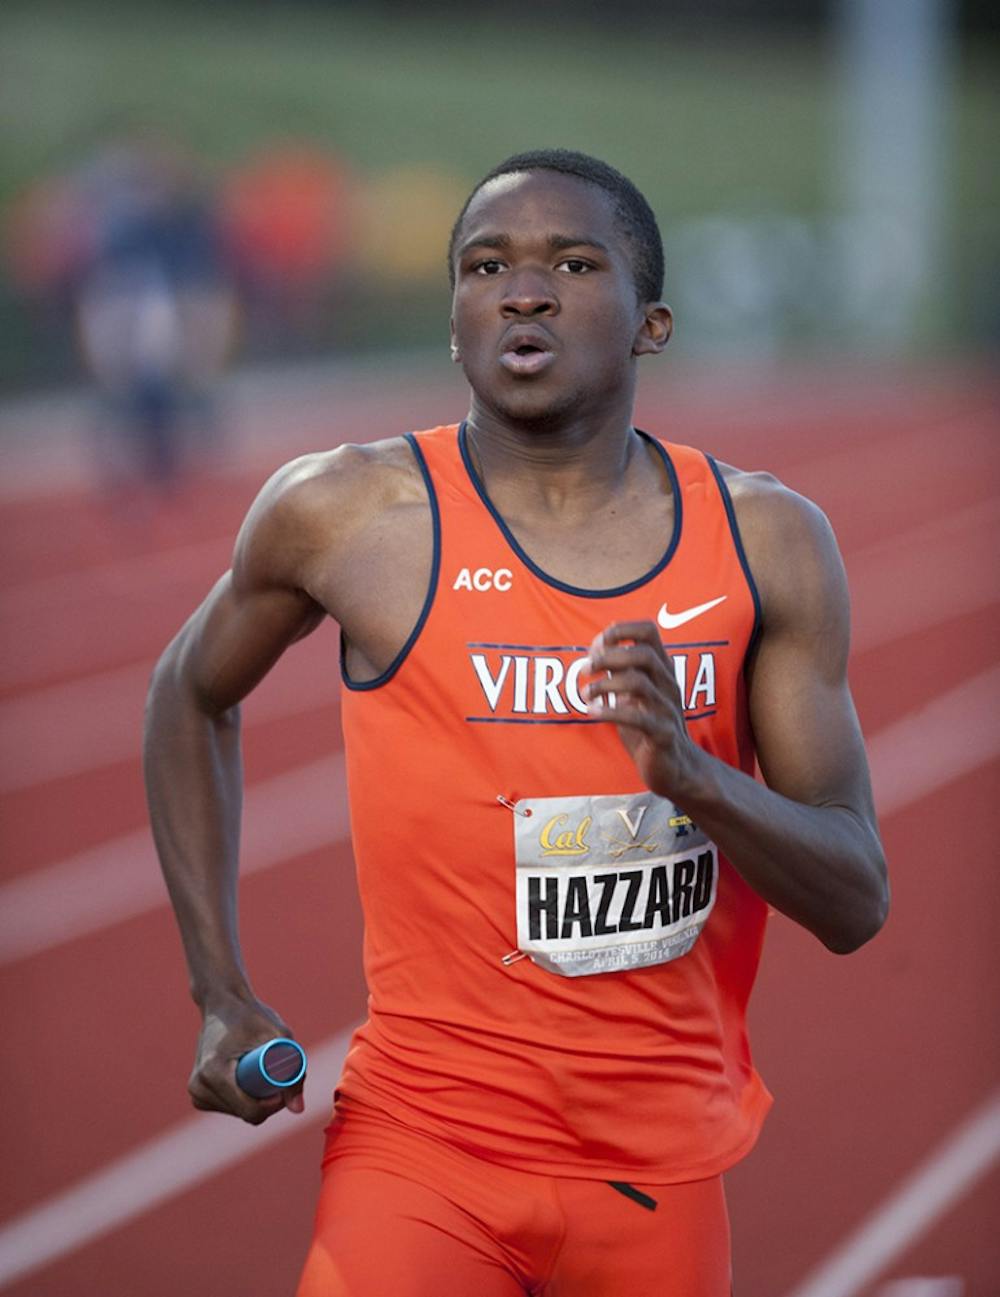 <p>Senior Payton Hazzard teamed up with sophomores Nathan Kiley, Mike Marsella and Henry Wynne for a sixth-place finish in the men's distance medley relay. </p>